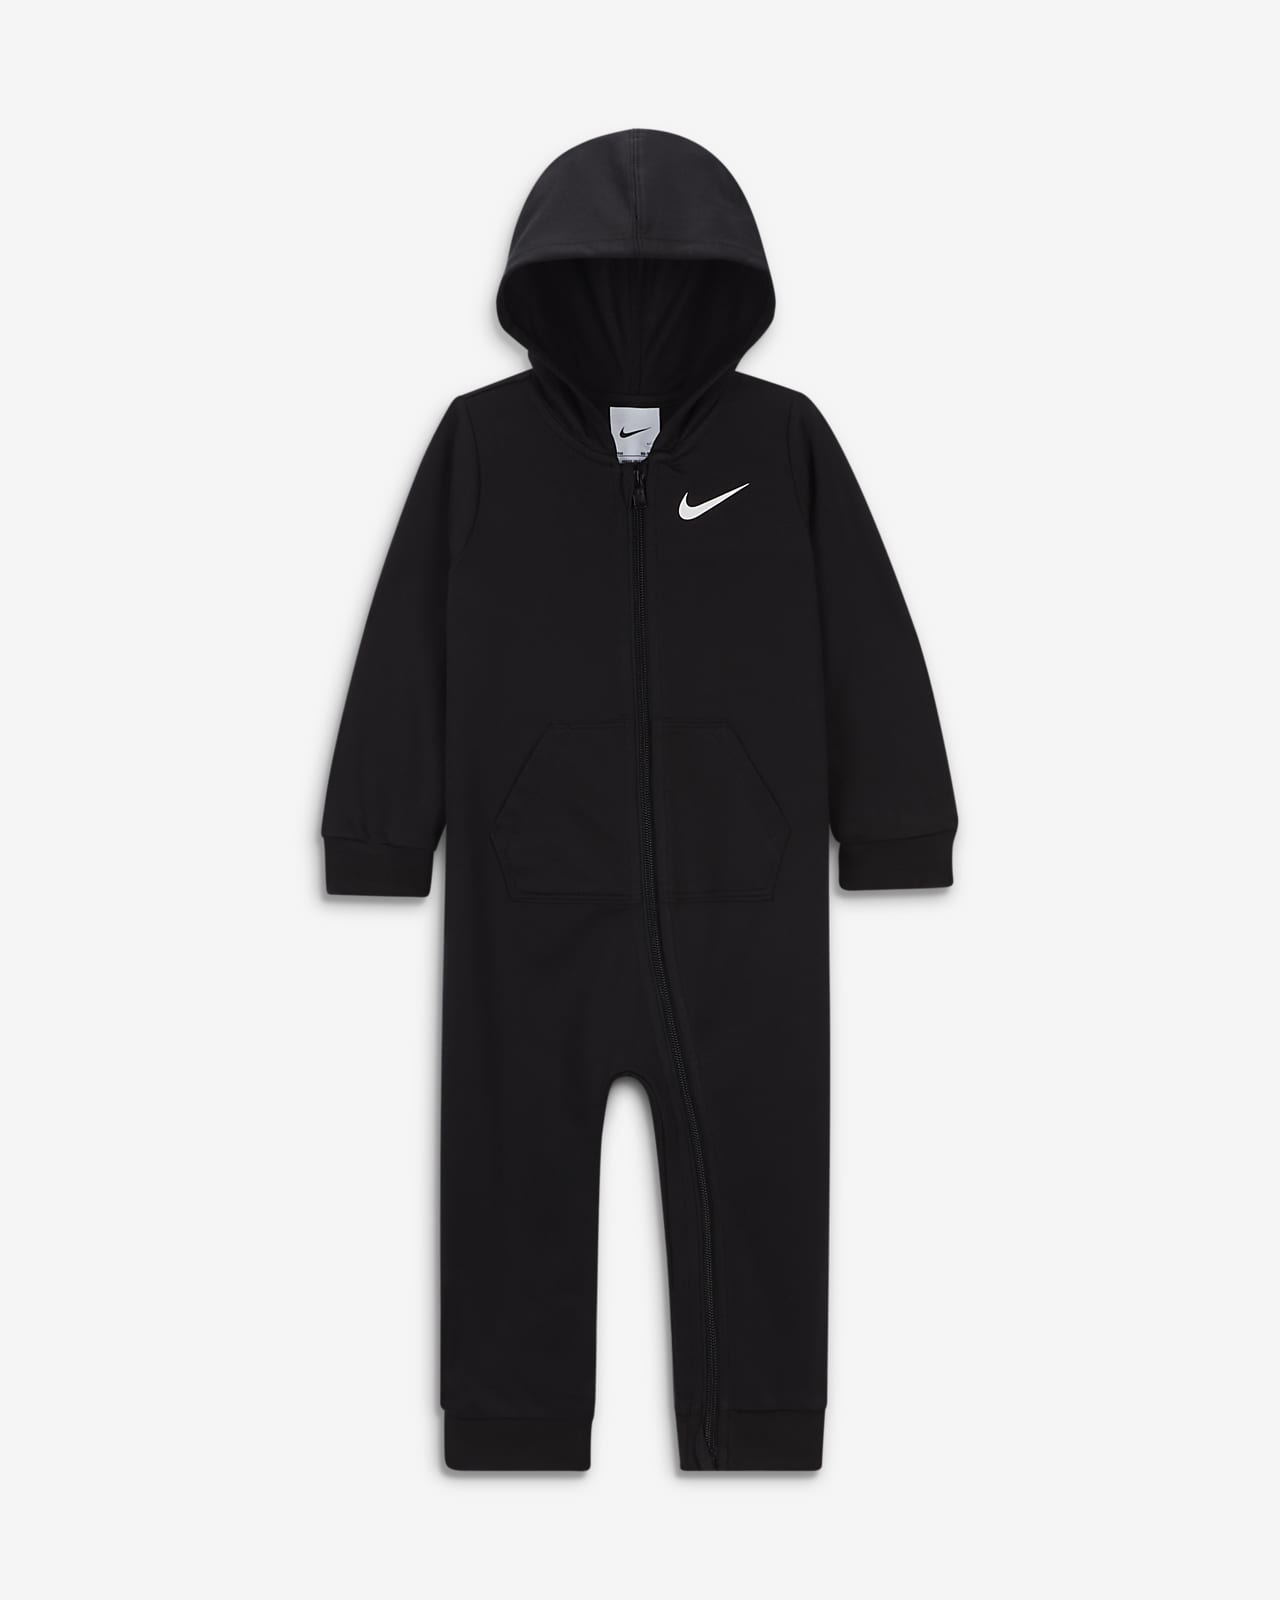 Nike Essentials Baby (12-24M) Hooded Coverall